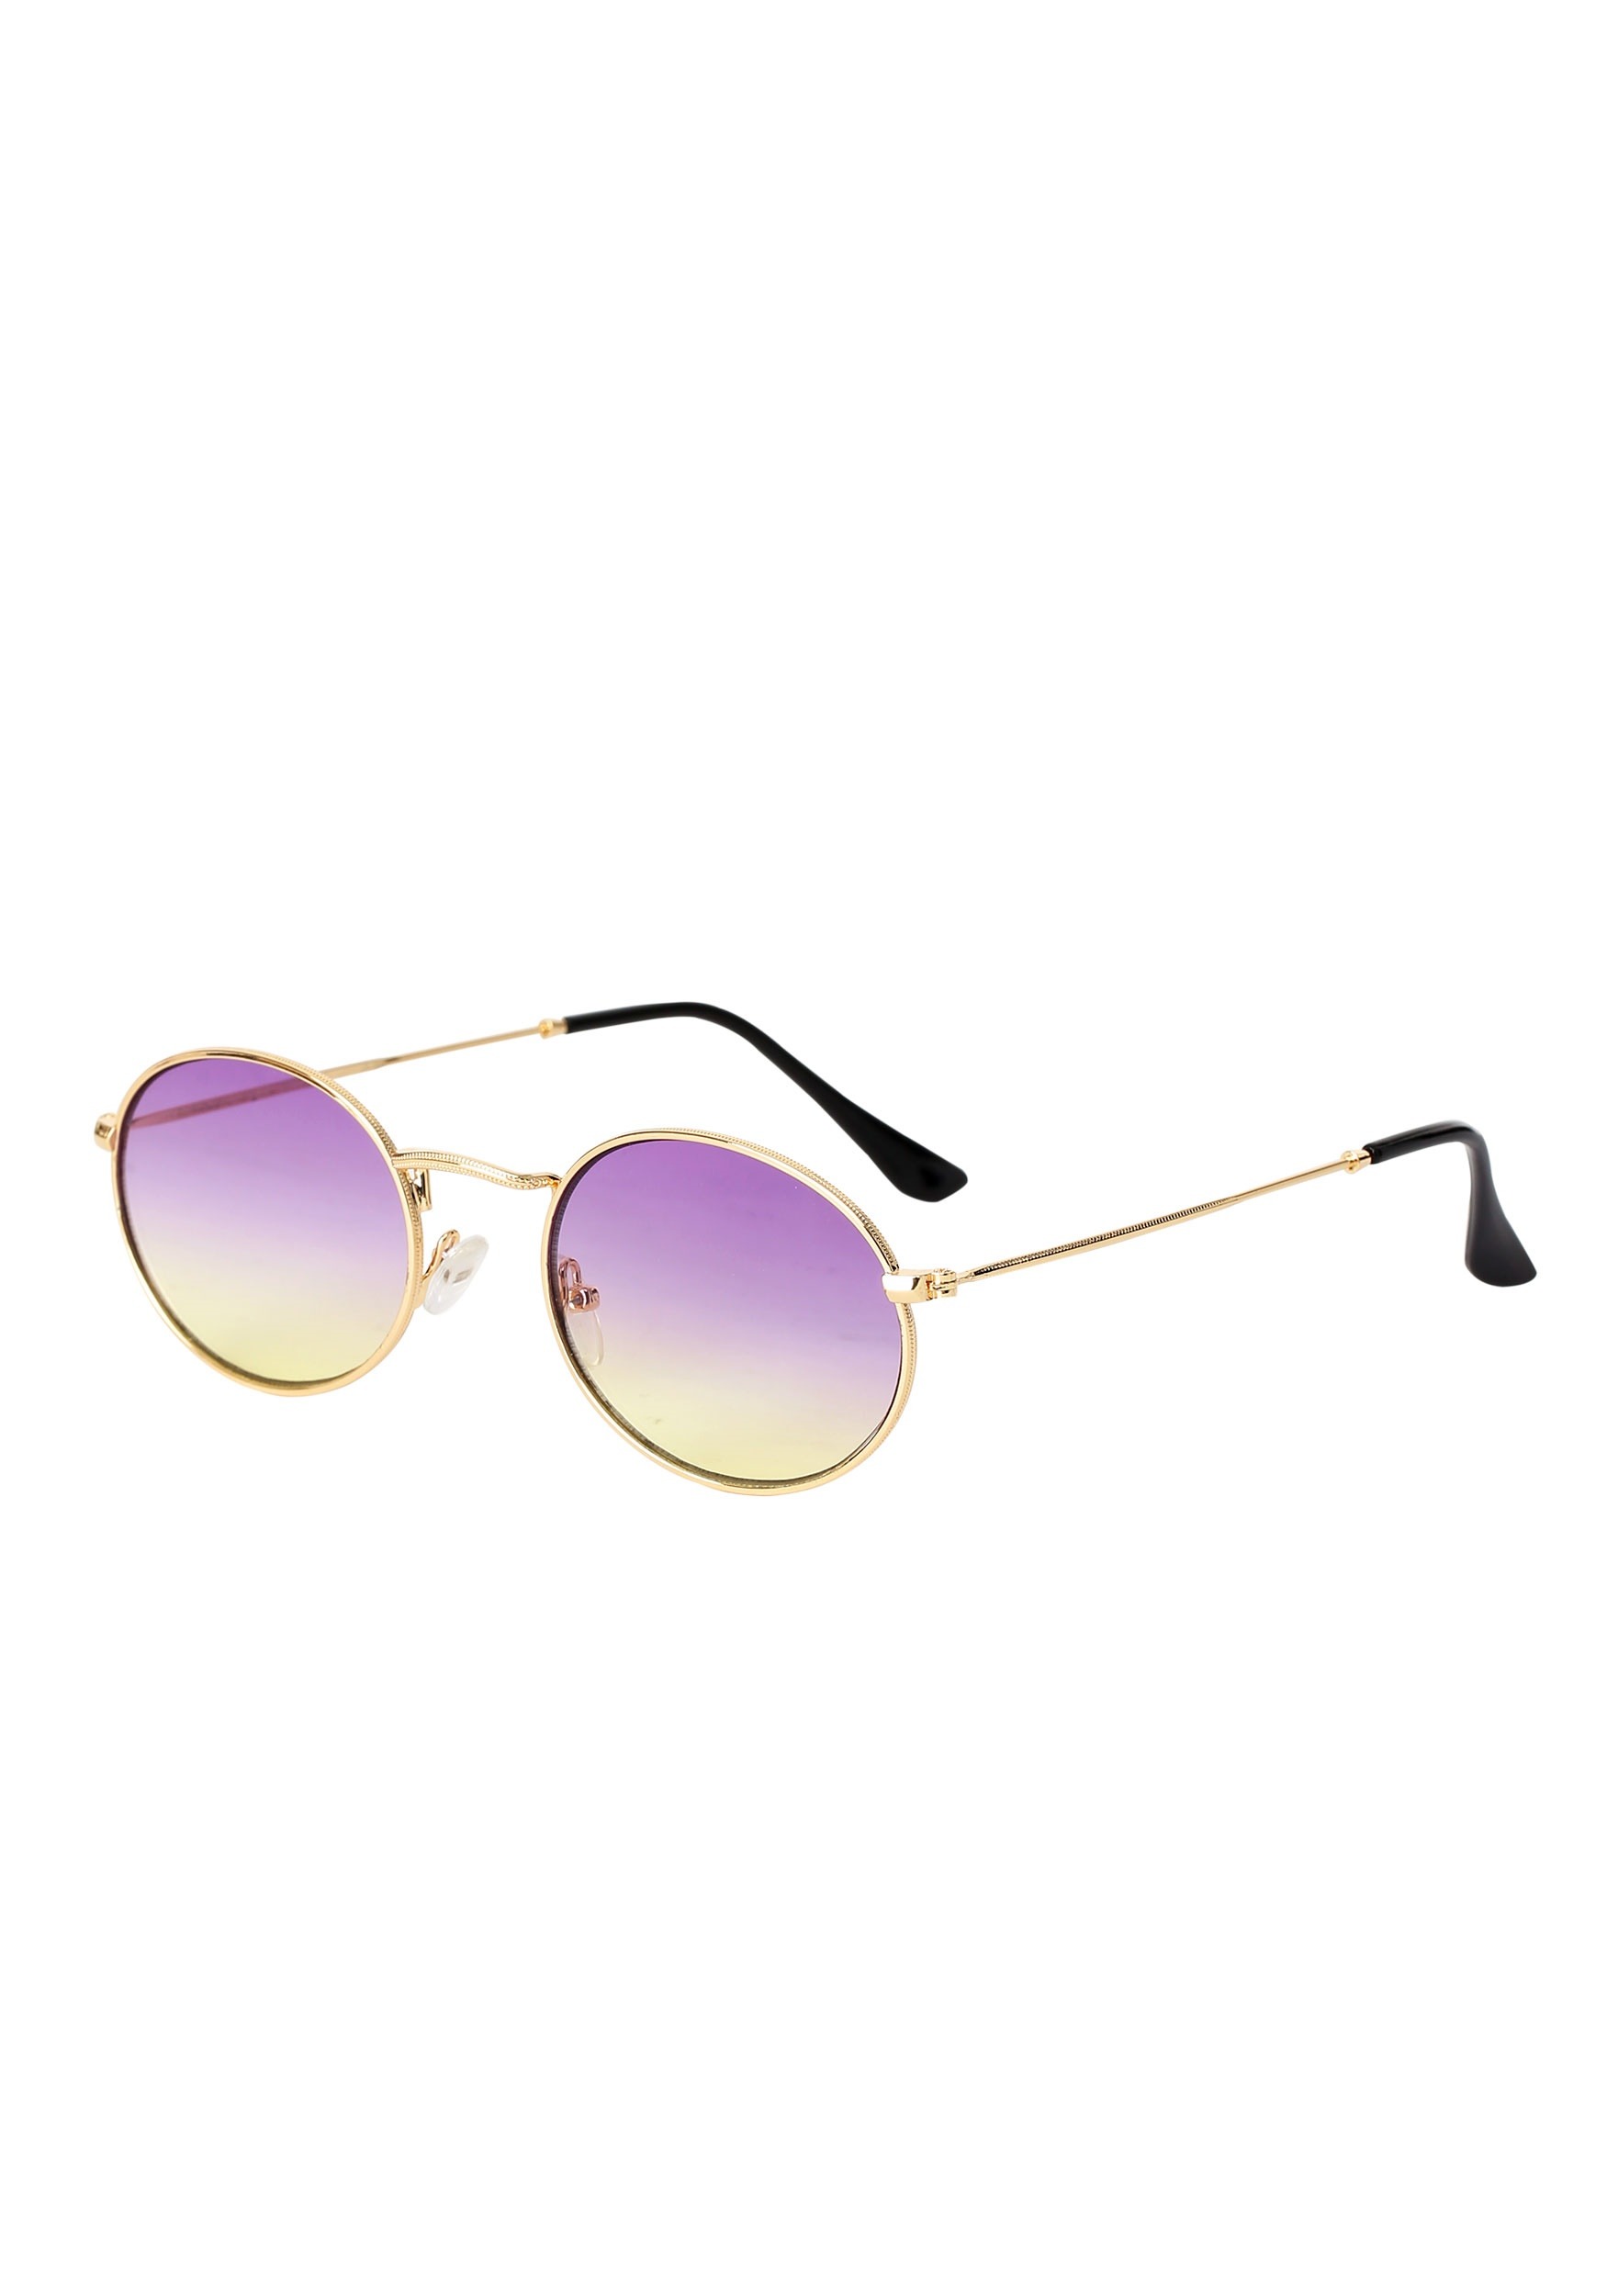 Still summer. The blue denim fade &9s available at L&F.  https://lensandframe.co/collections/womens-sunglasses-1/products/9-denim- fade-sunglasses